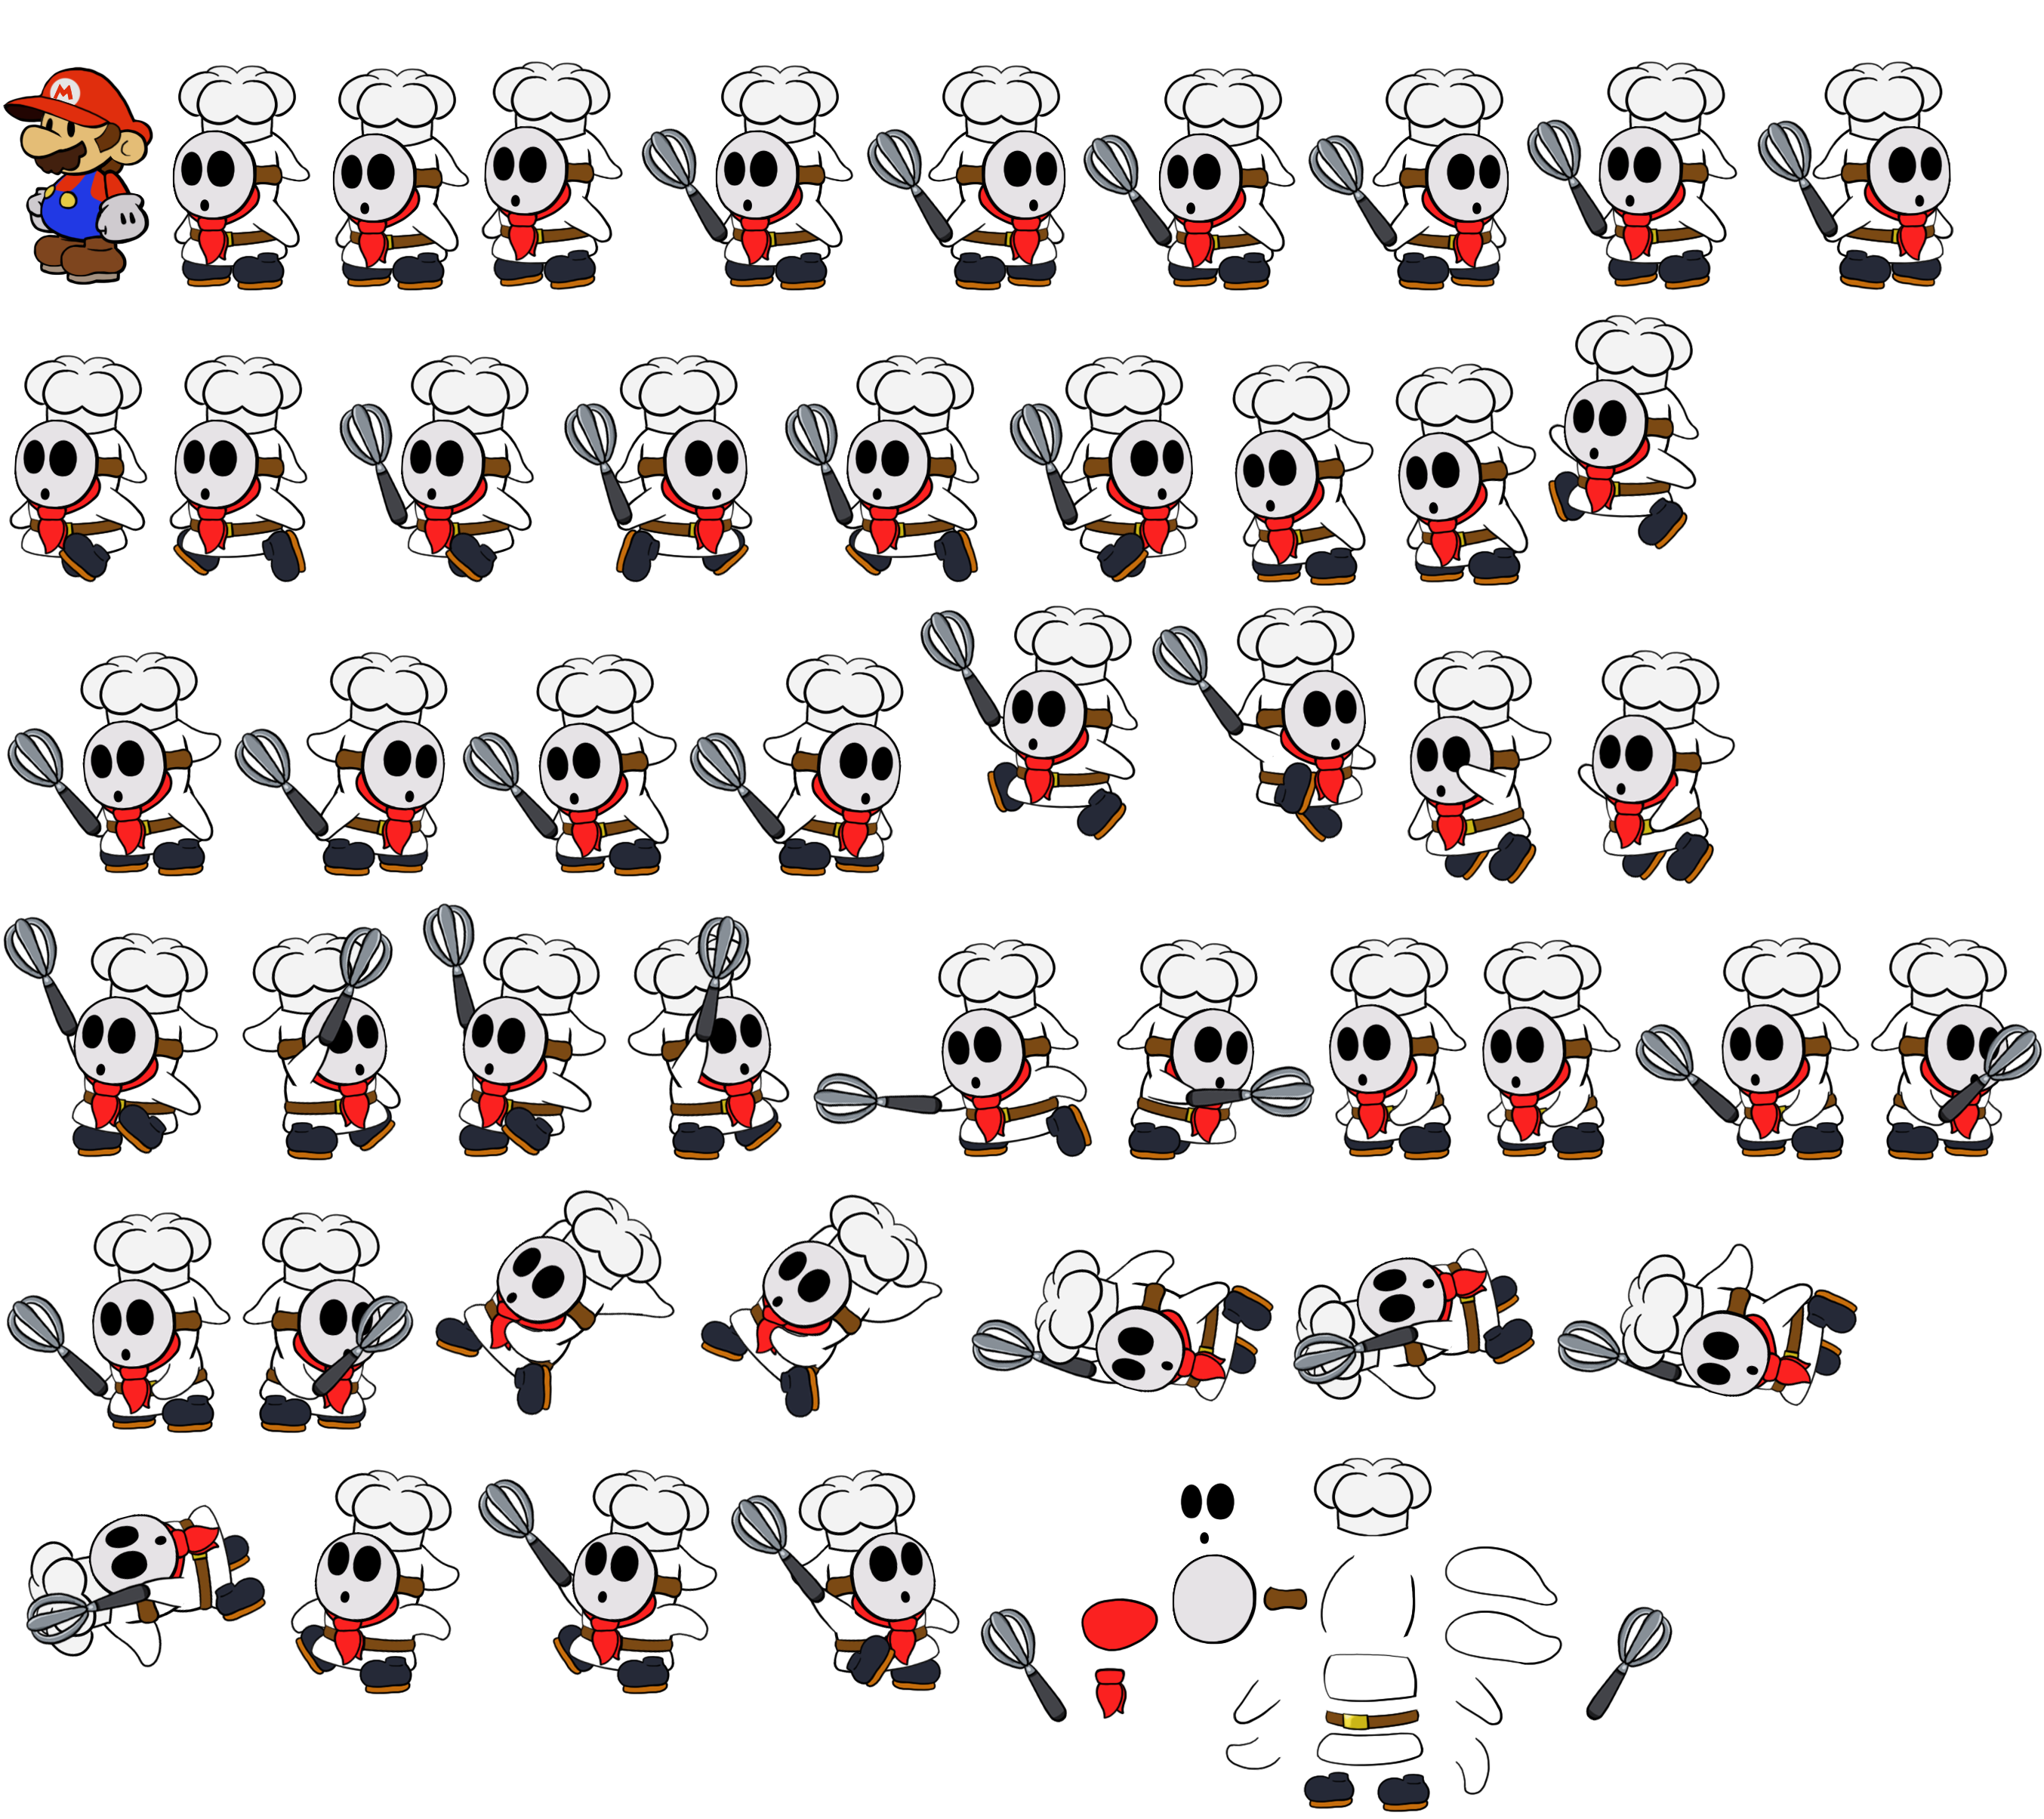 Shy Guy (Pastry Chef, Paper Mario-Style)